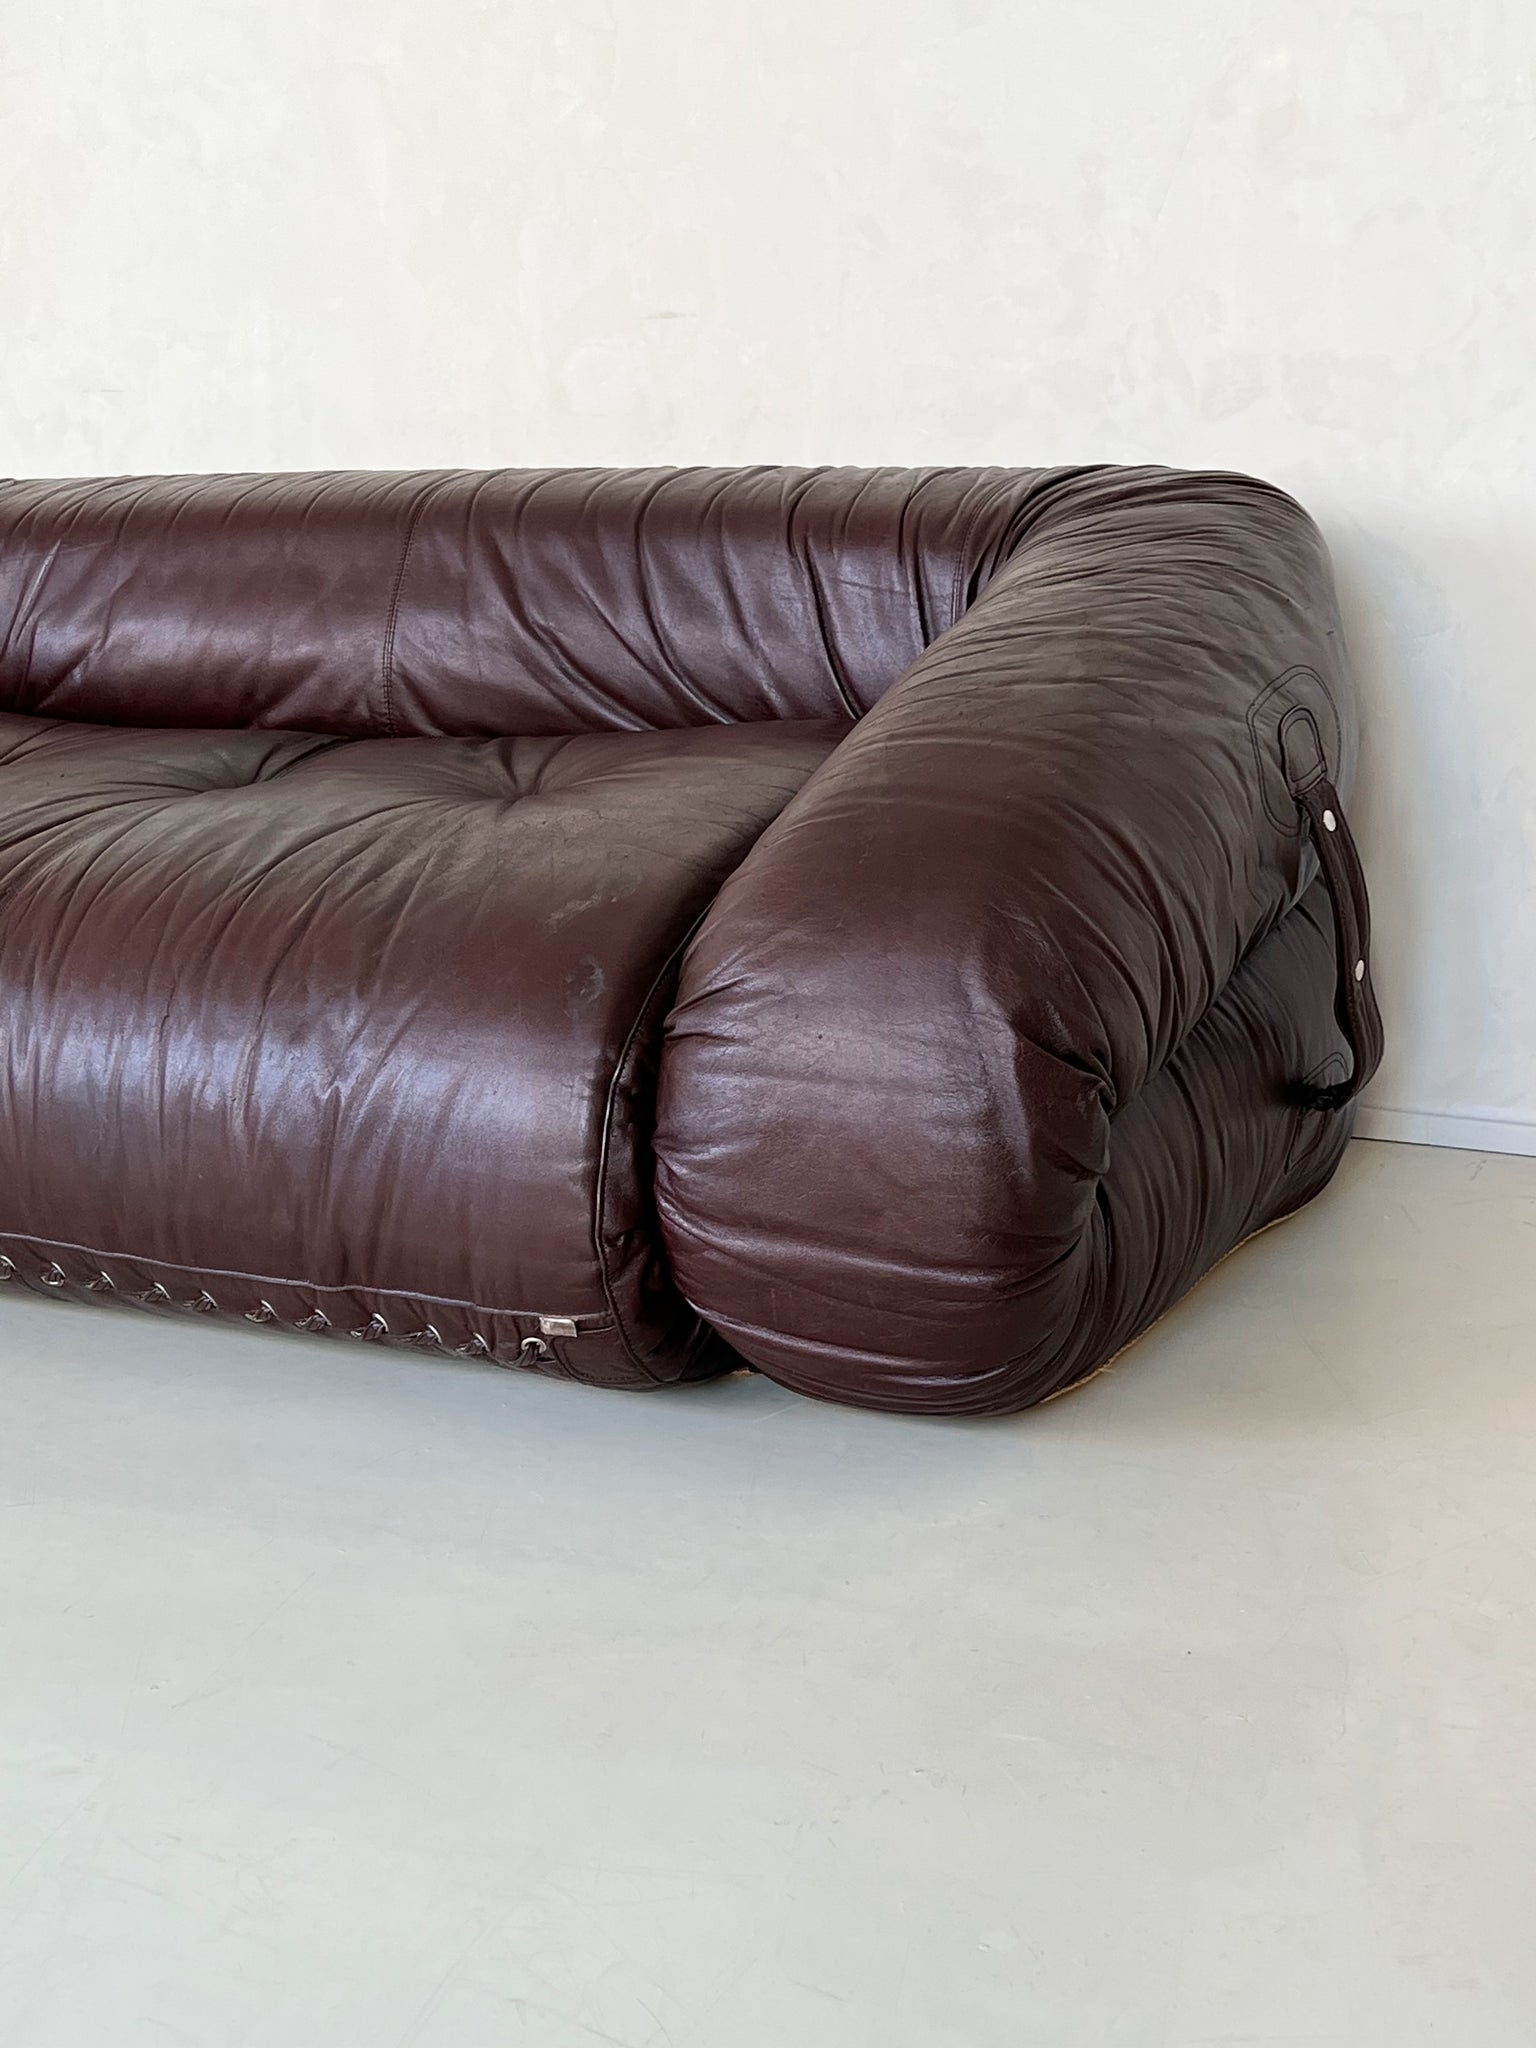 1970s Brown Leather Anfibio Sofa by Alessandro Becchi for Giovannetti Italy